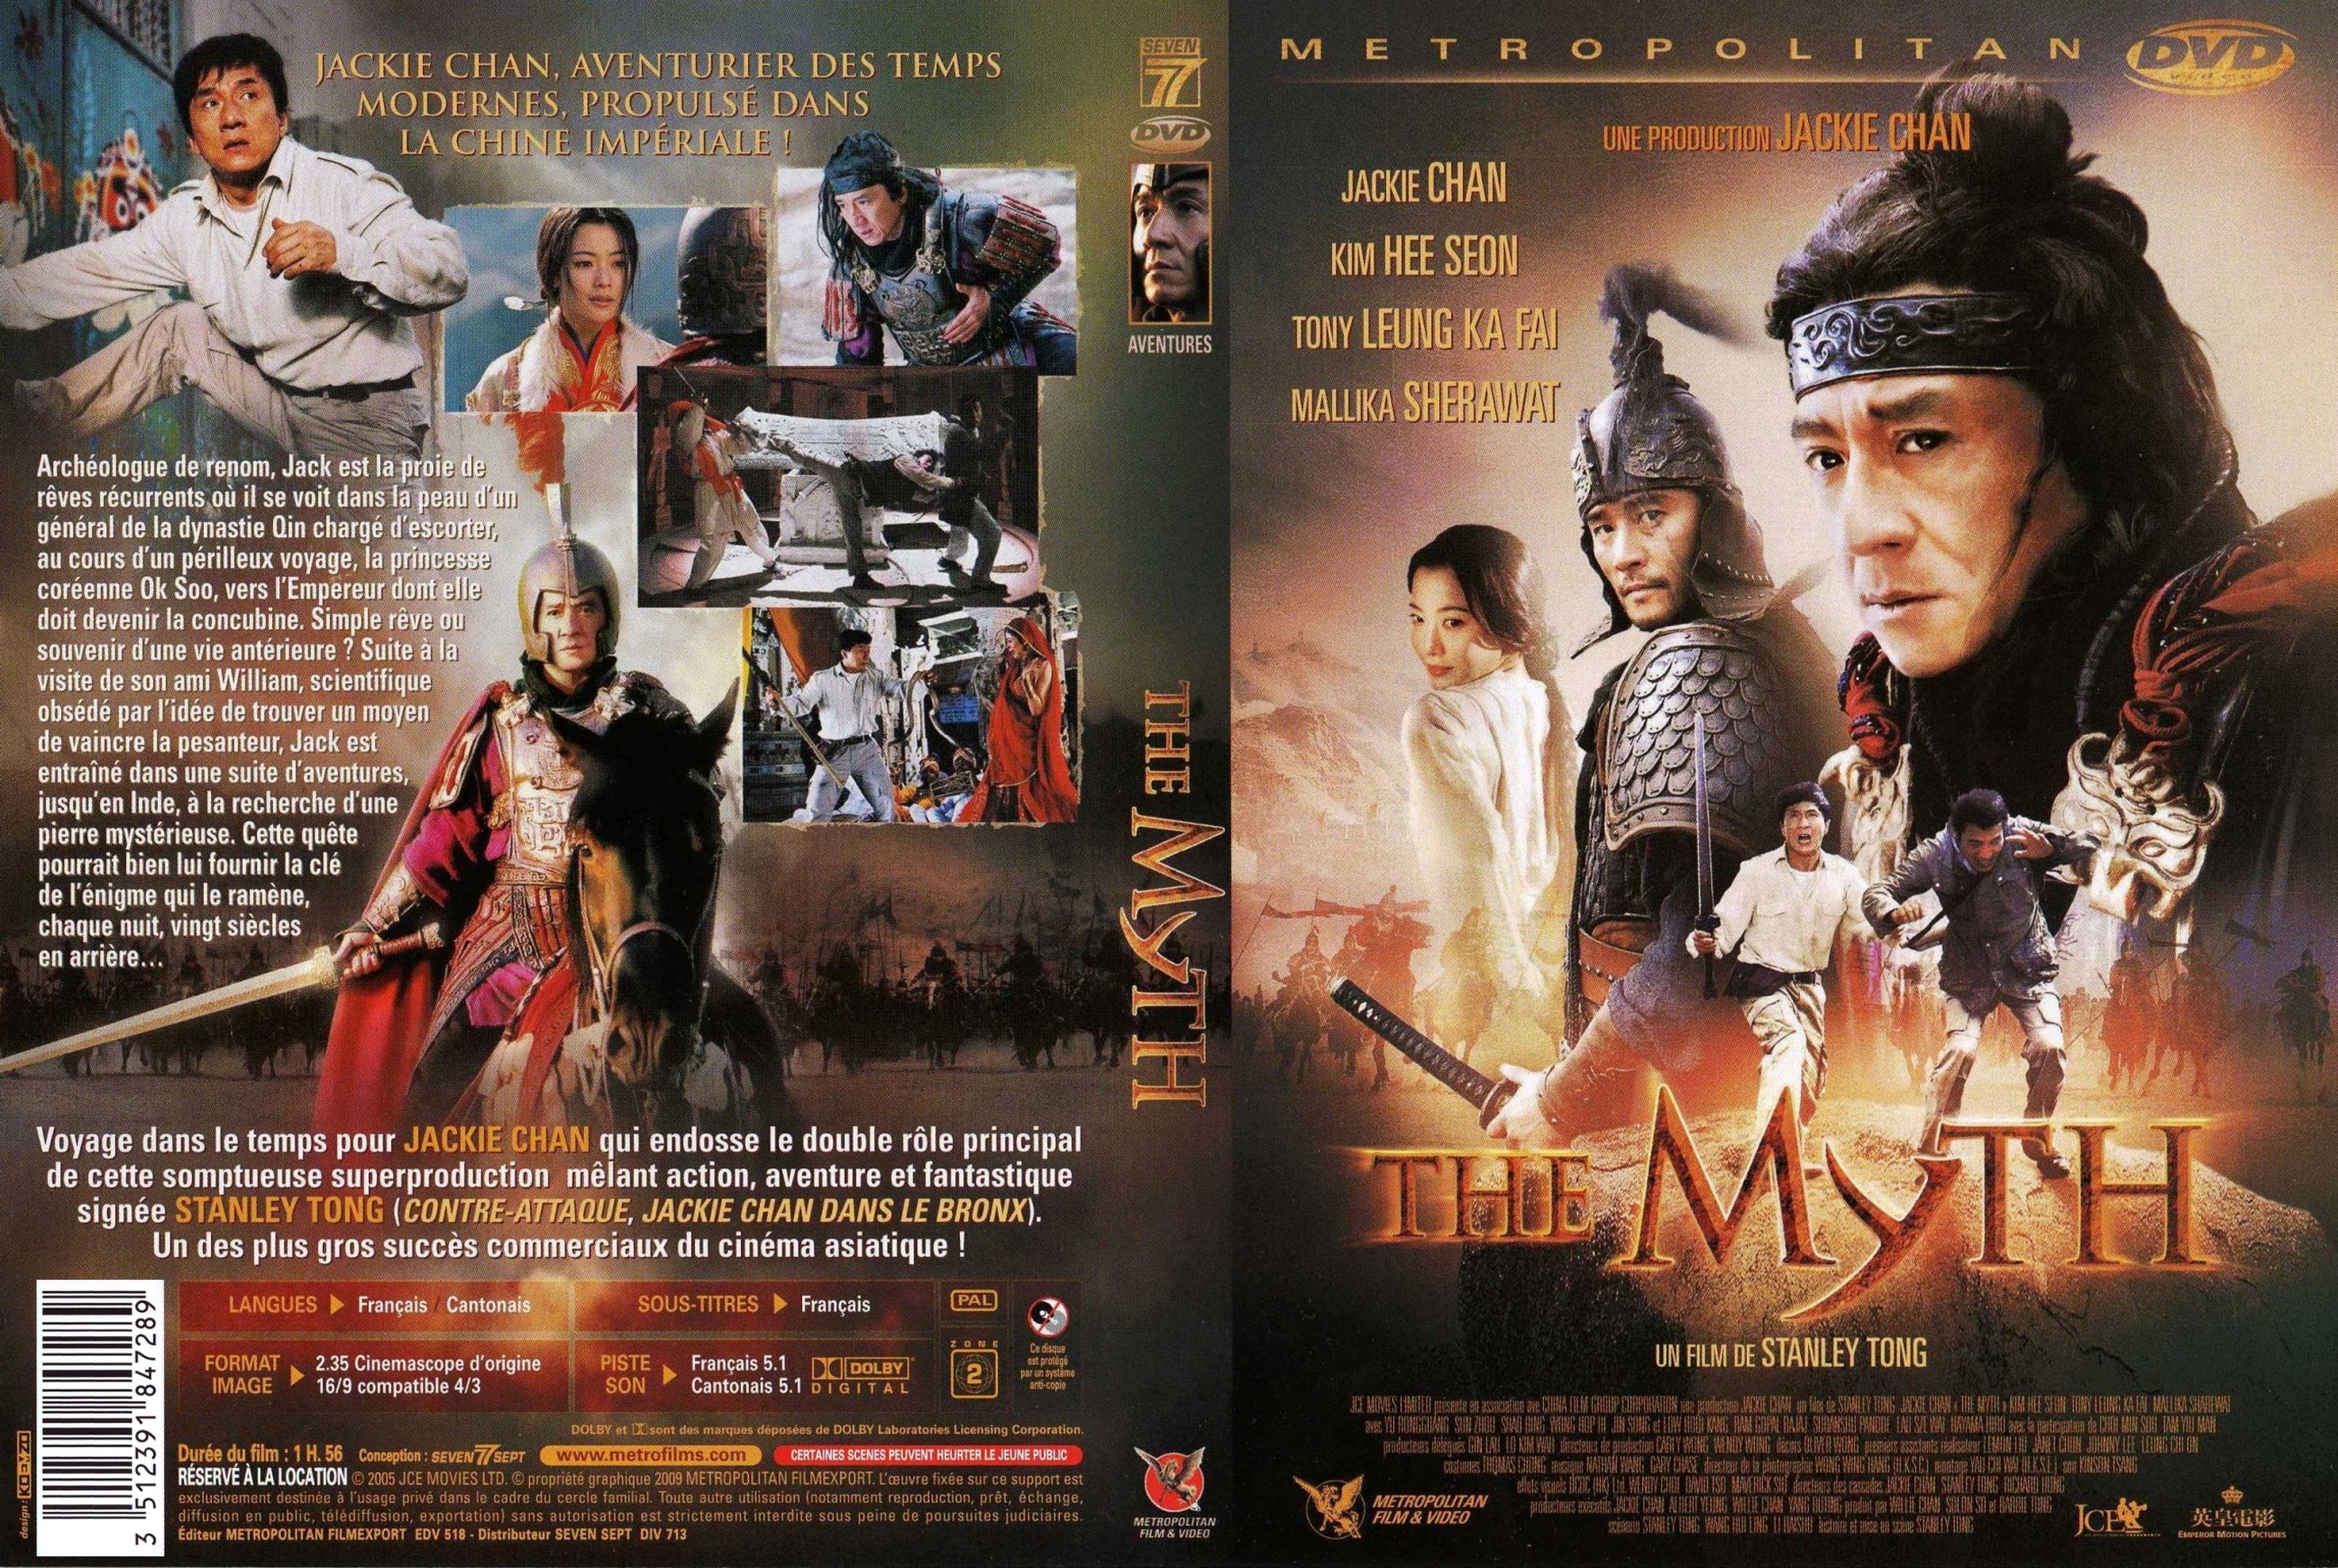 Jaquette DVD The myth (Jackie Chan) v3